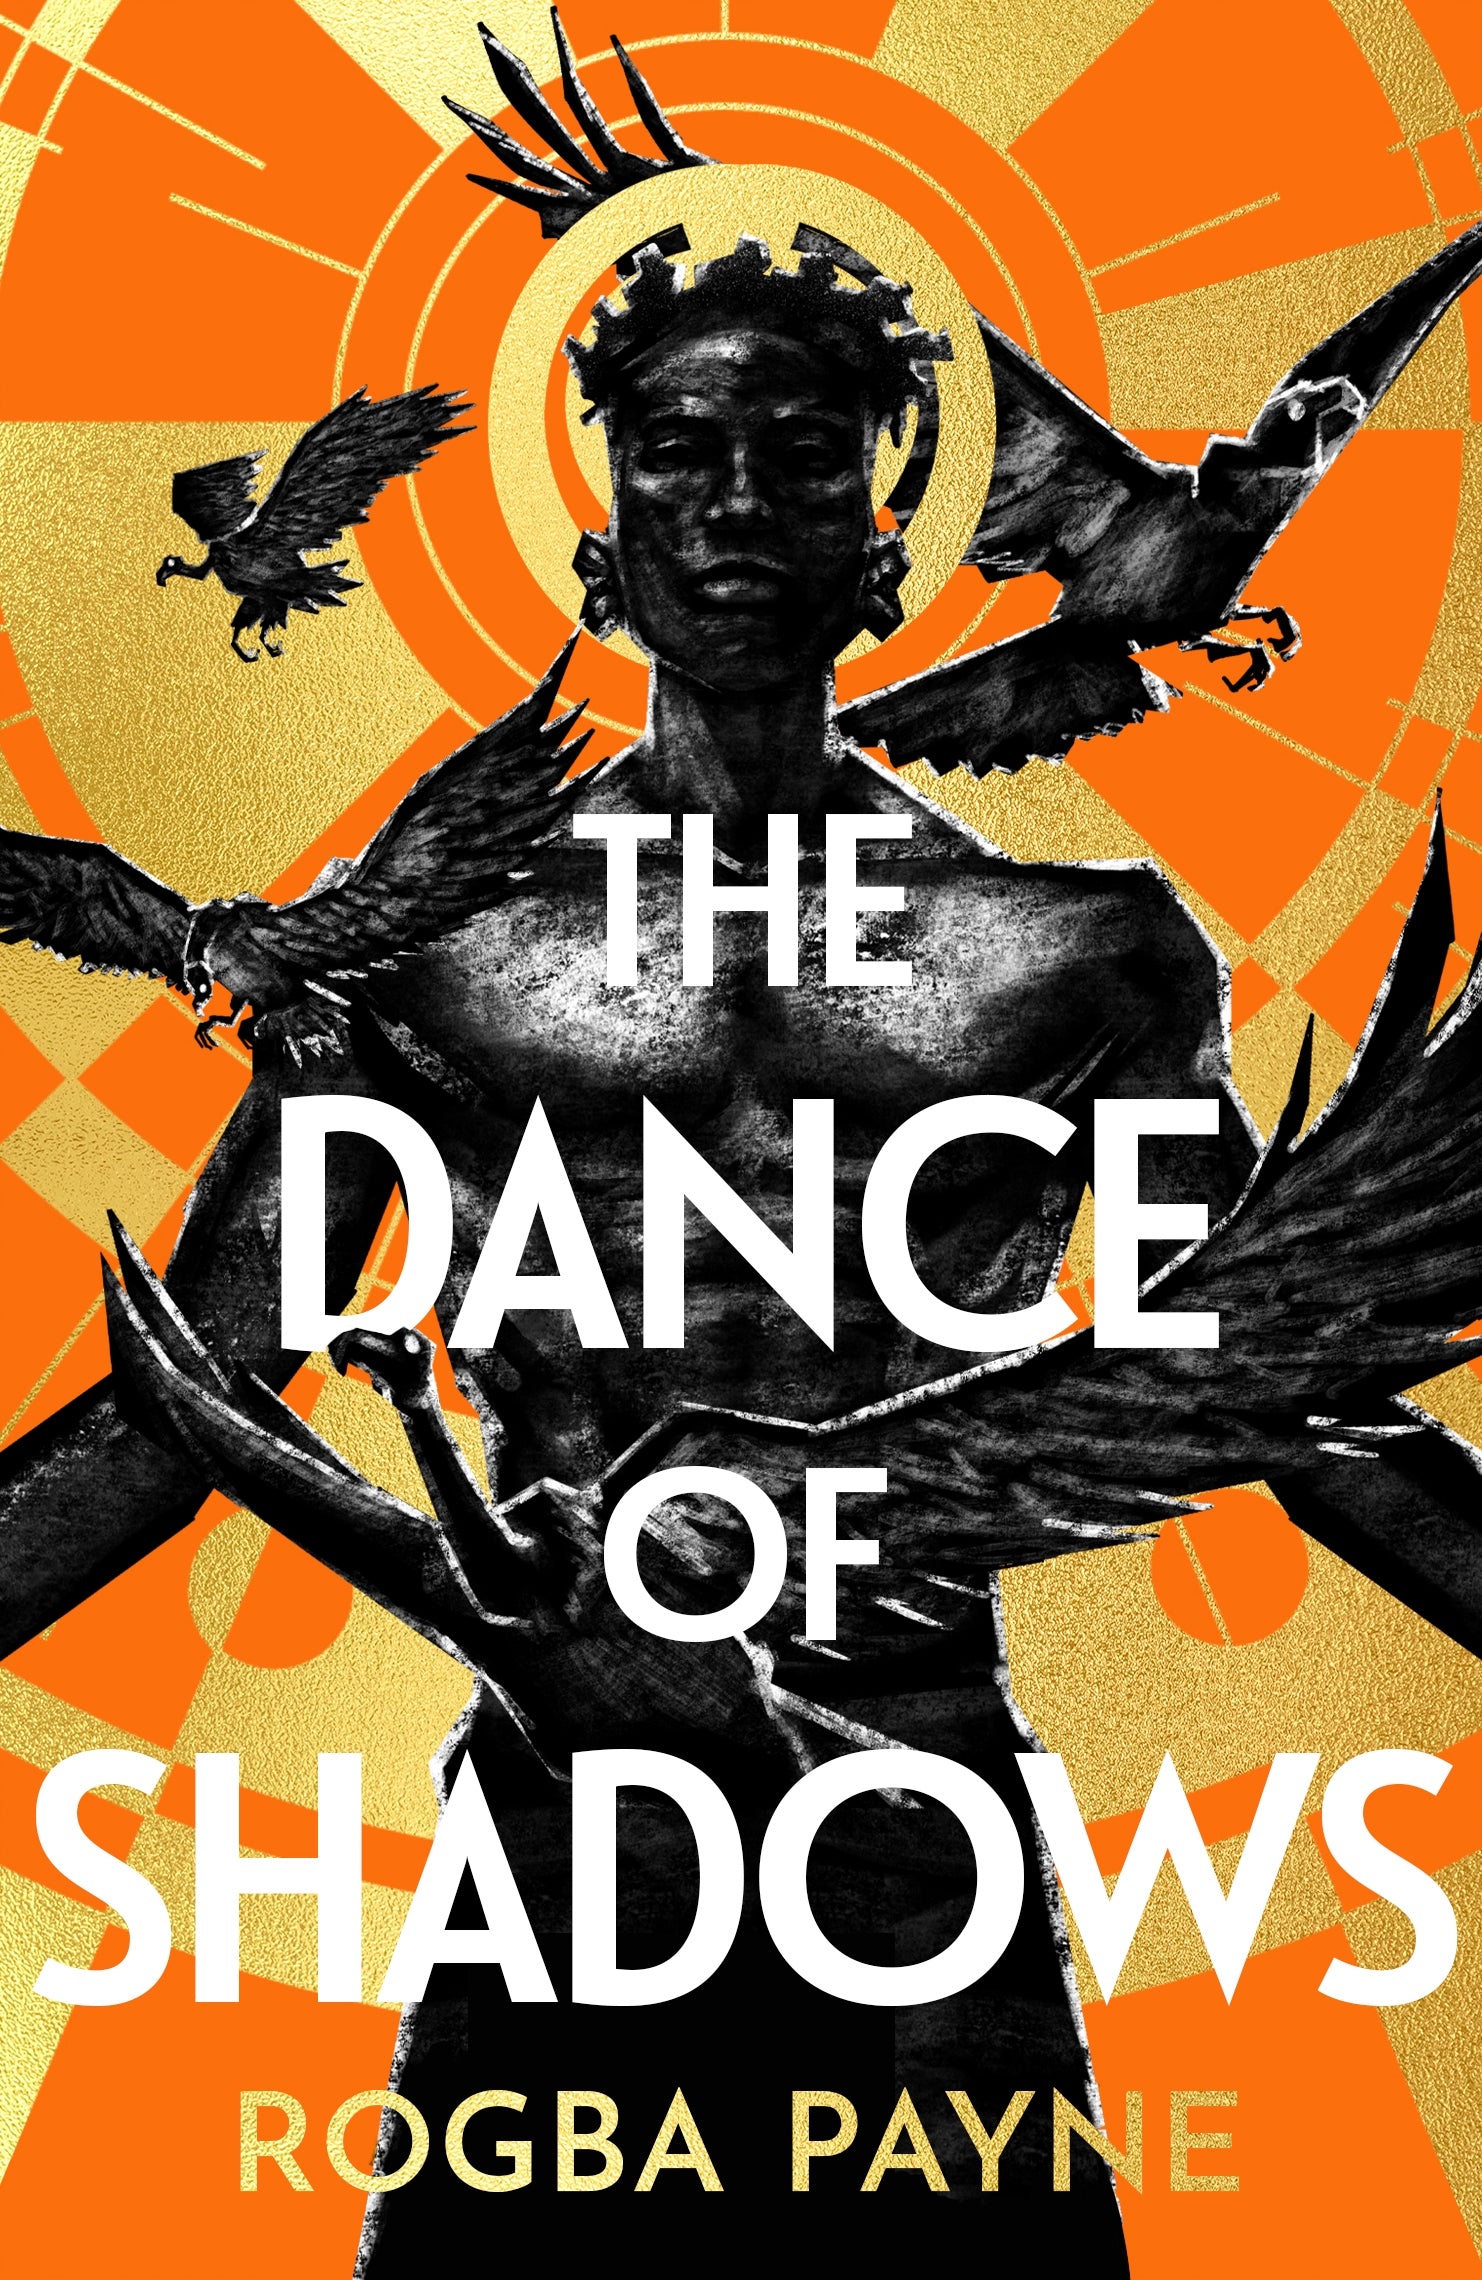 The Dance of Shadows by Rogba Payne